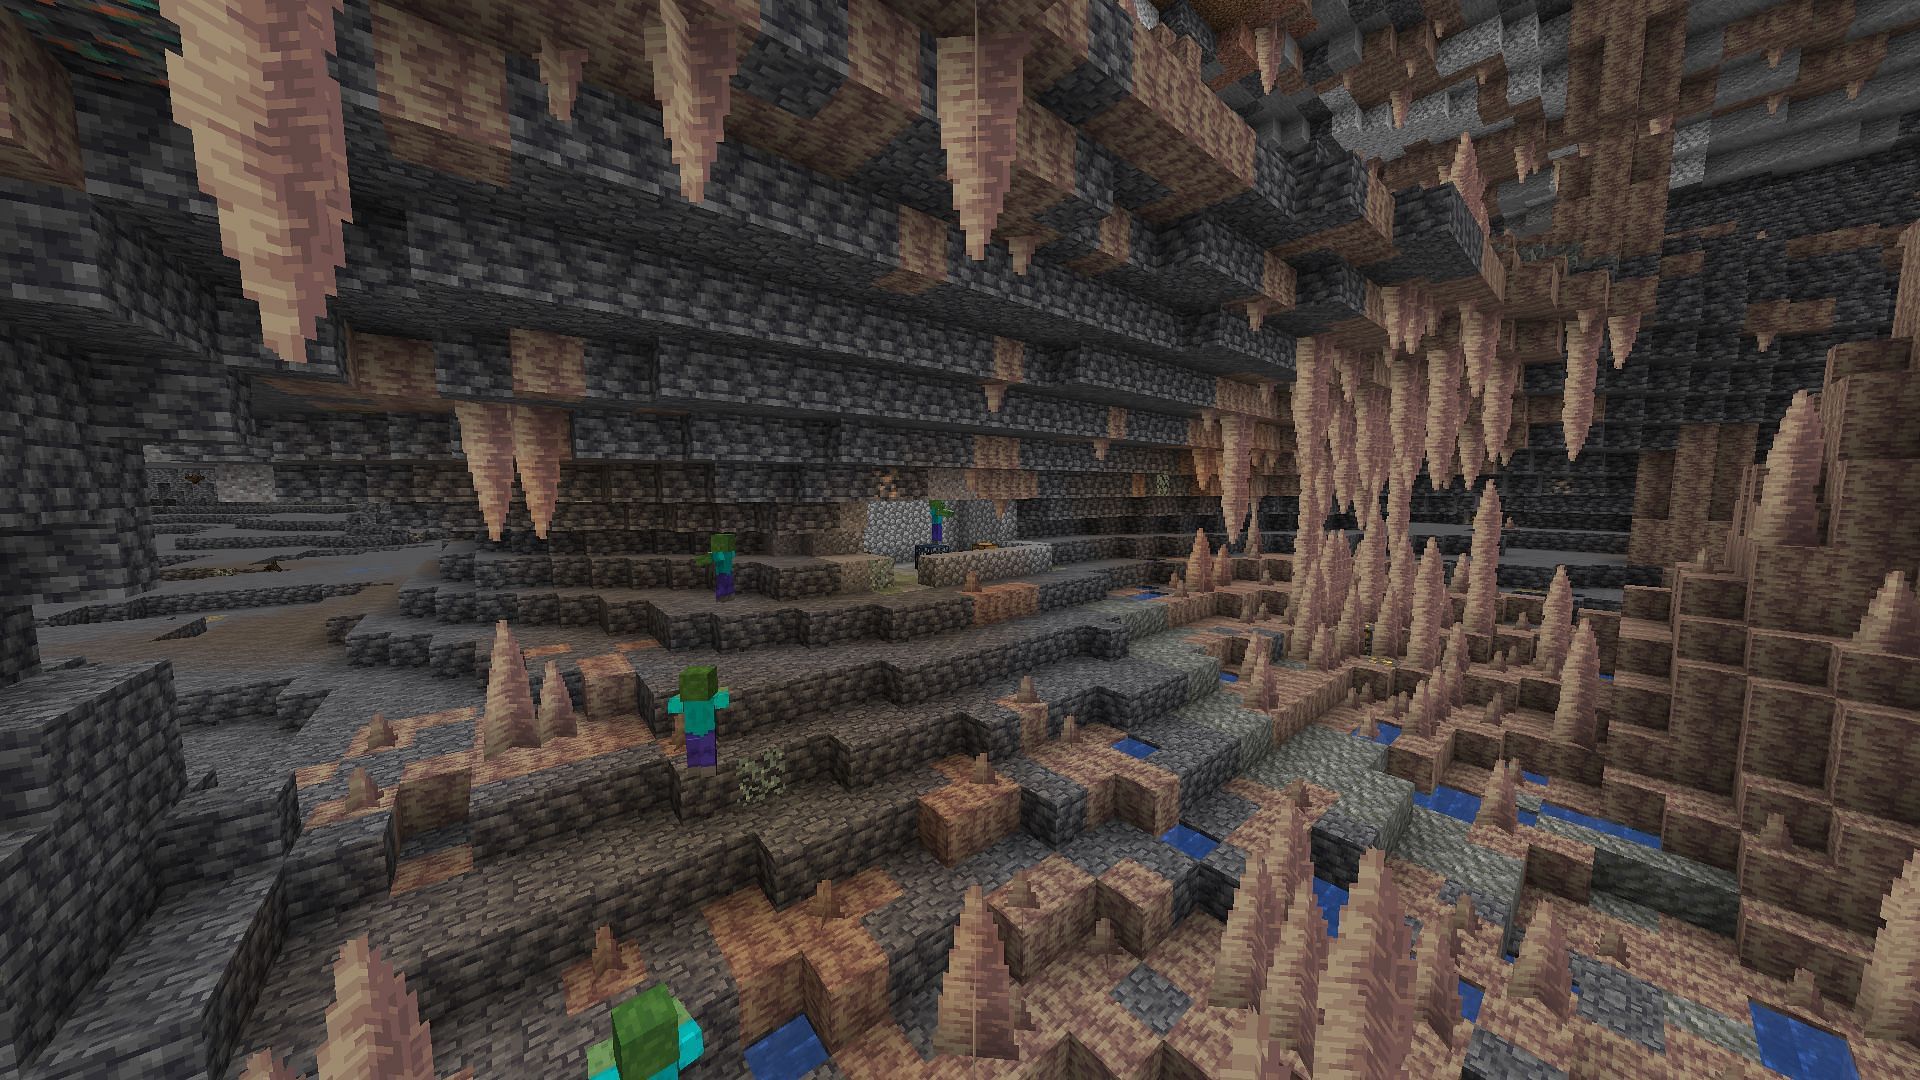 Zombie dungeon in a dripstone cave (Image via Minecraft)